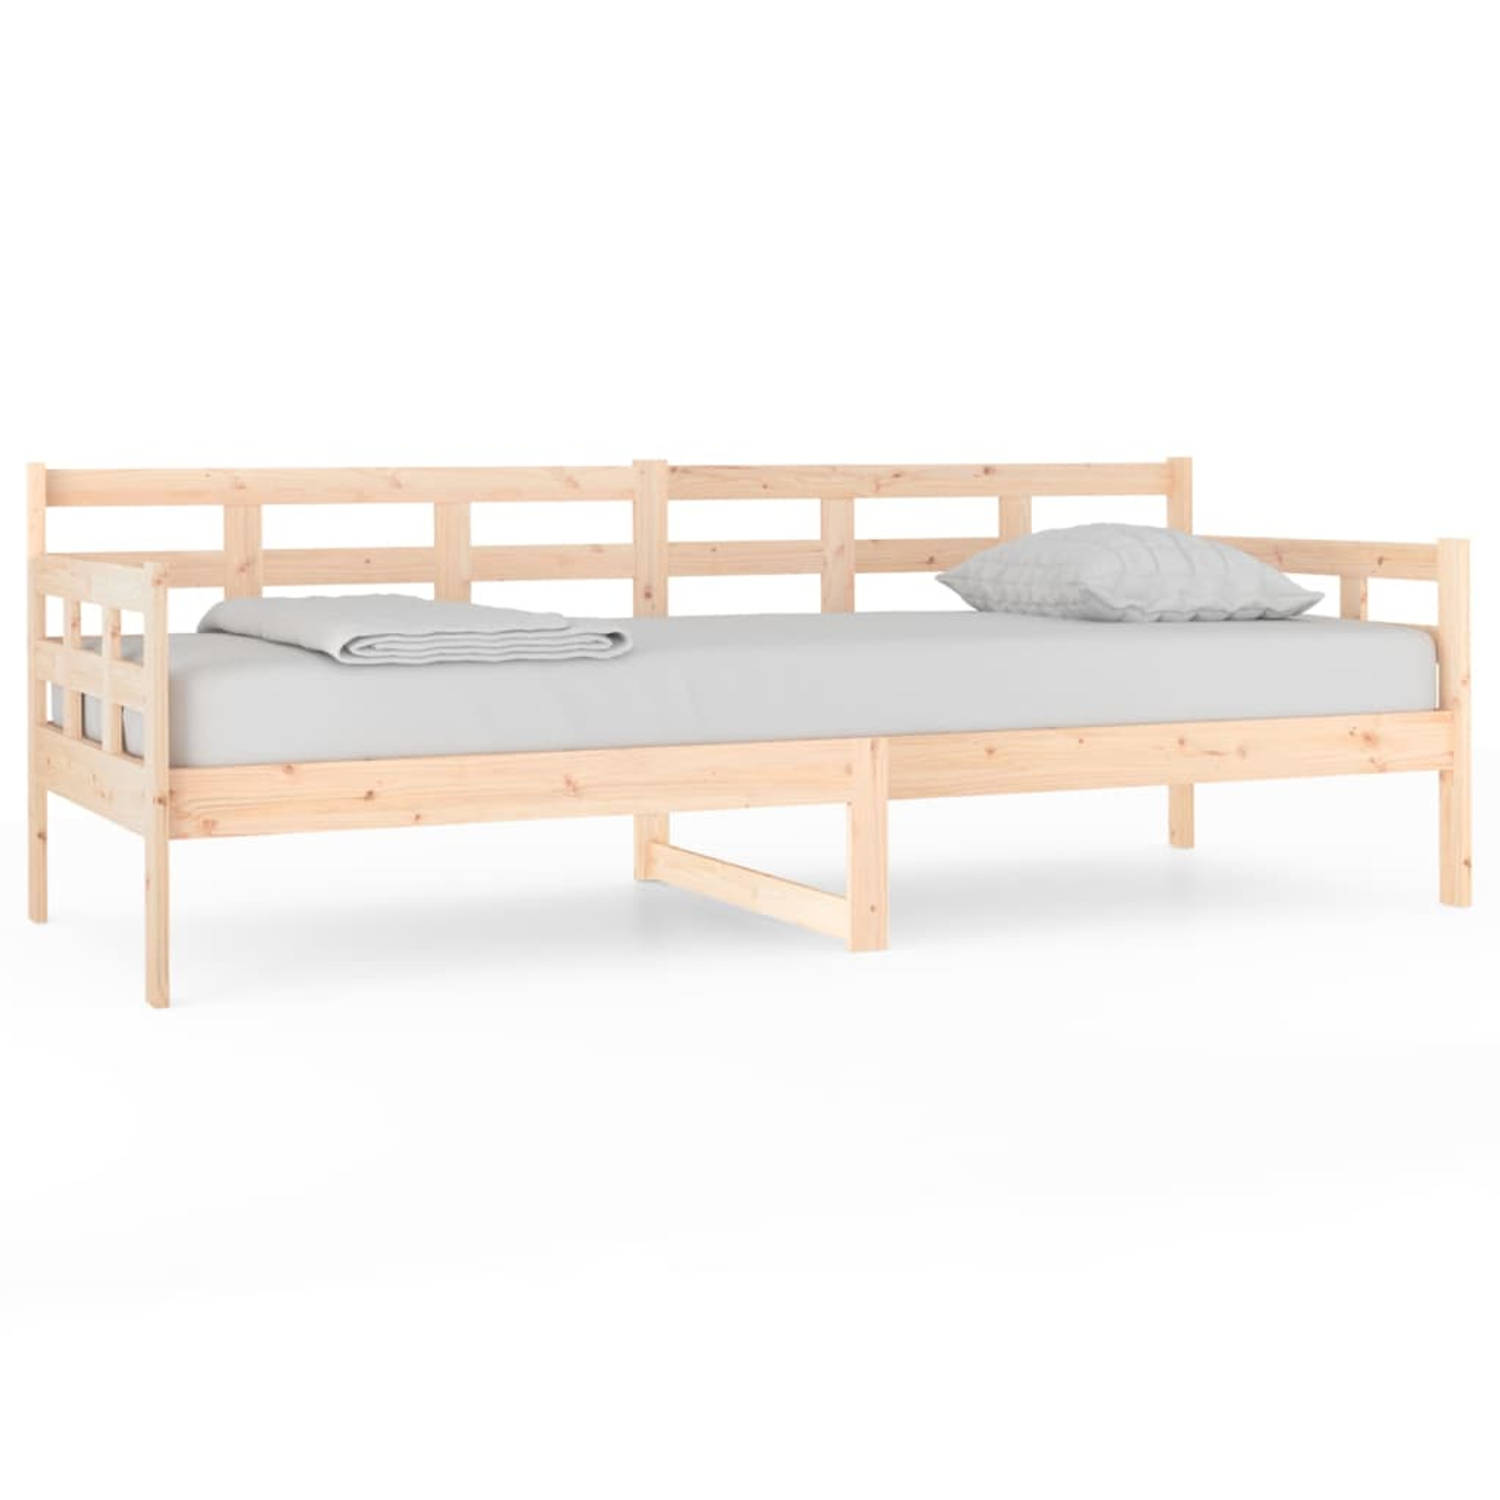 The Living Store Slaapbank massief grenenhout 80x200 cm - Bed